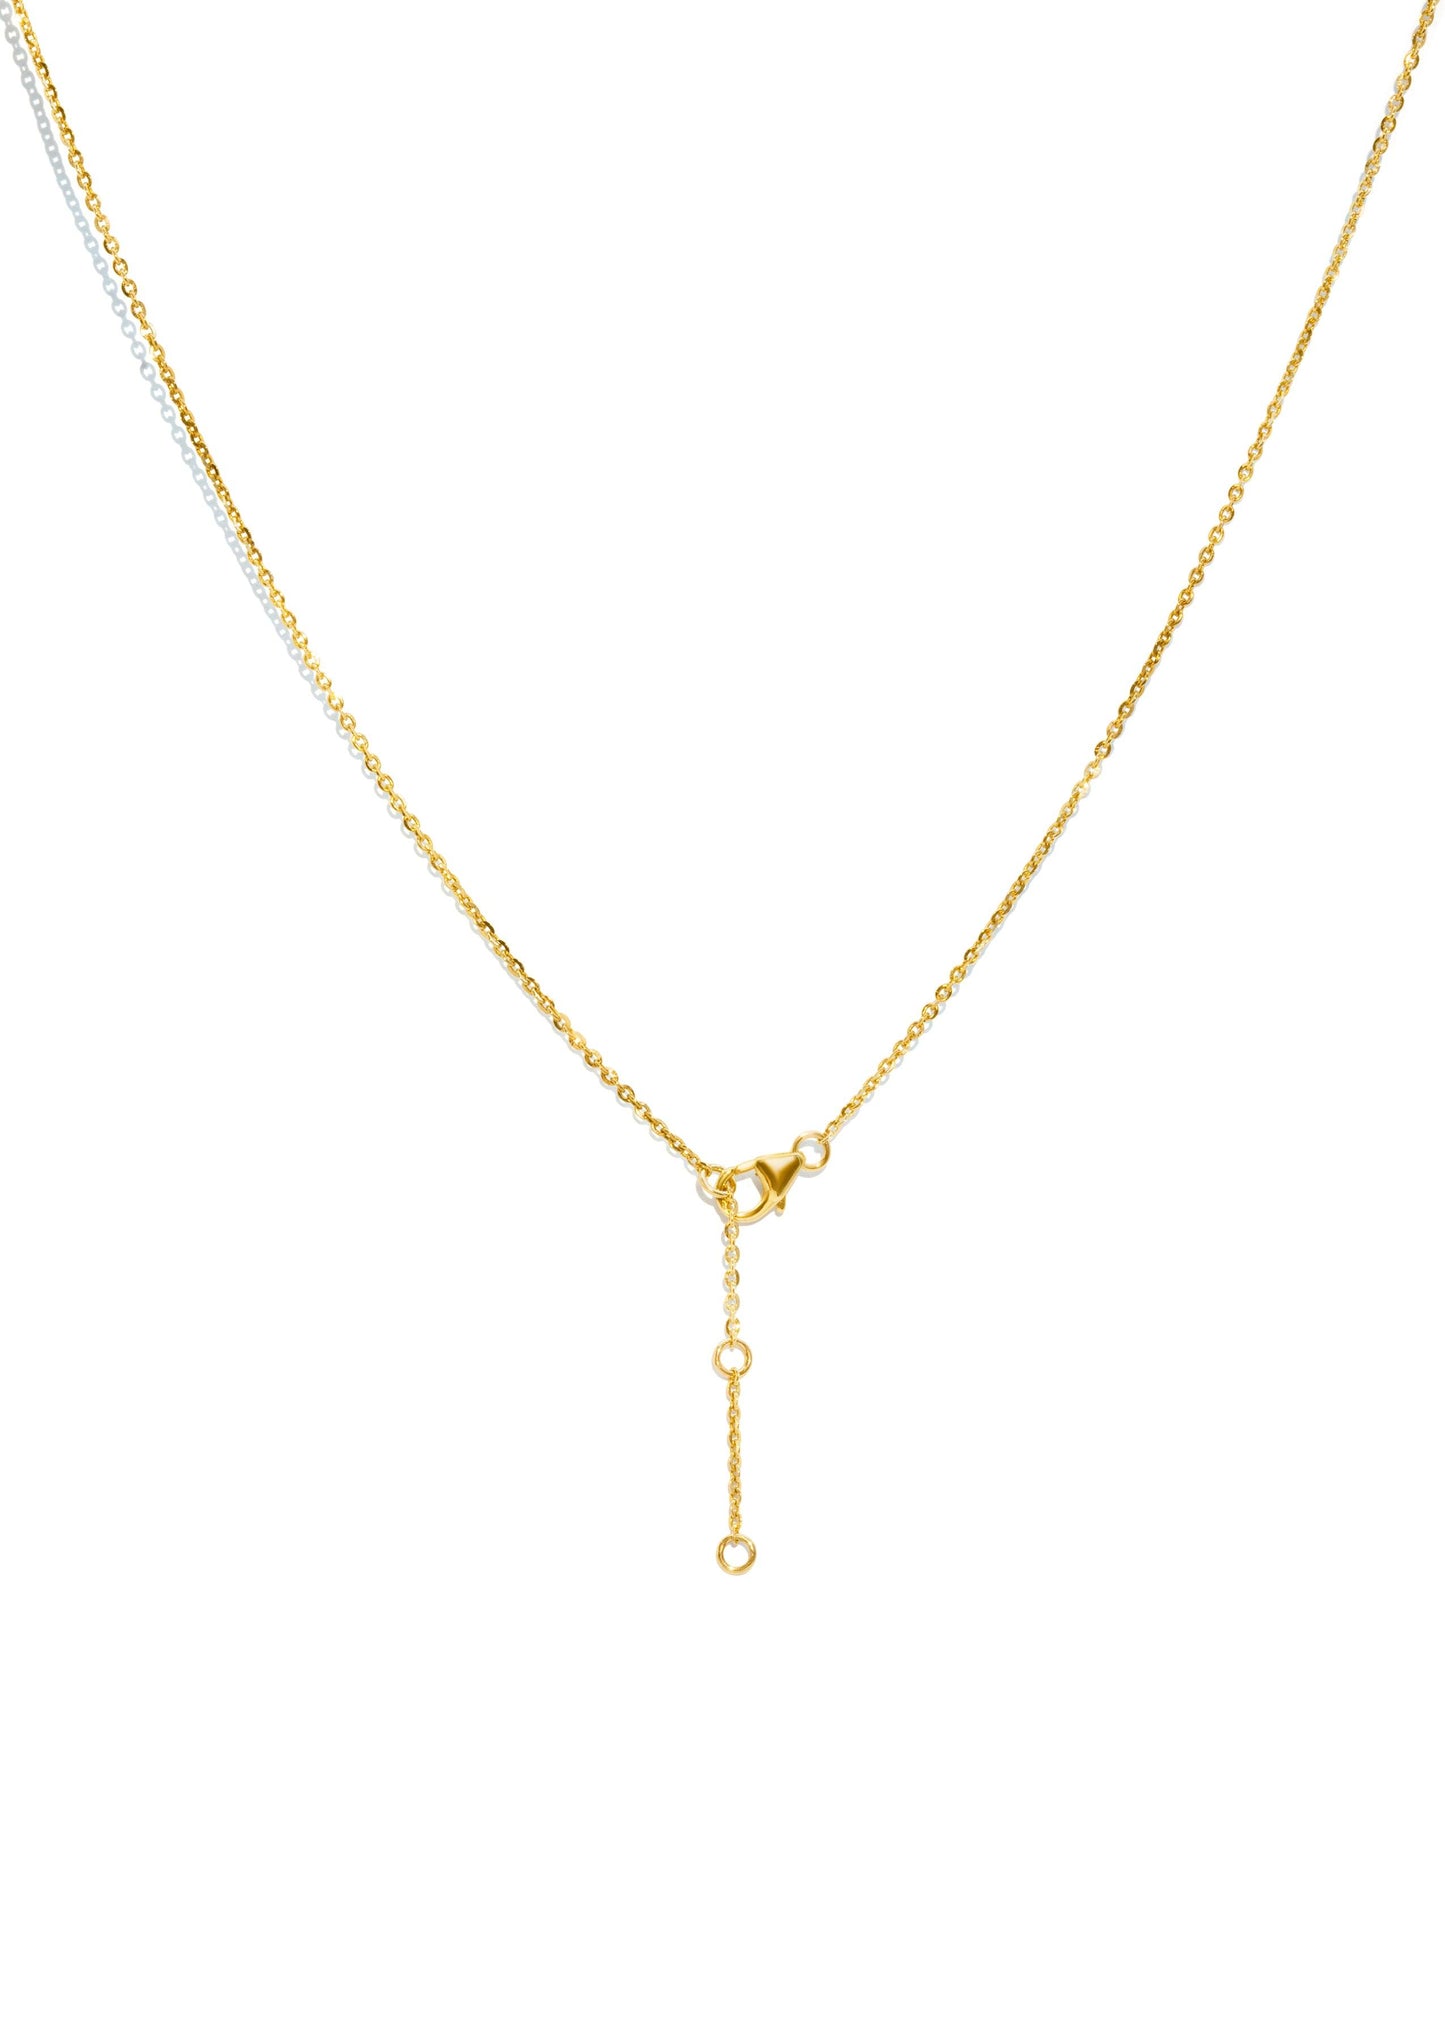 The Toi Et Moi Cultured Diamond 10ct Solid Gold Necklace - Molten Store